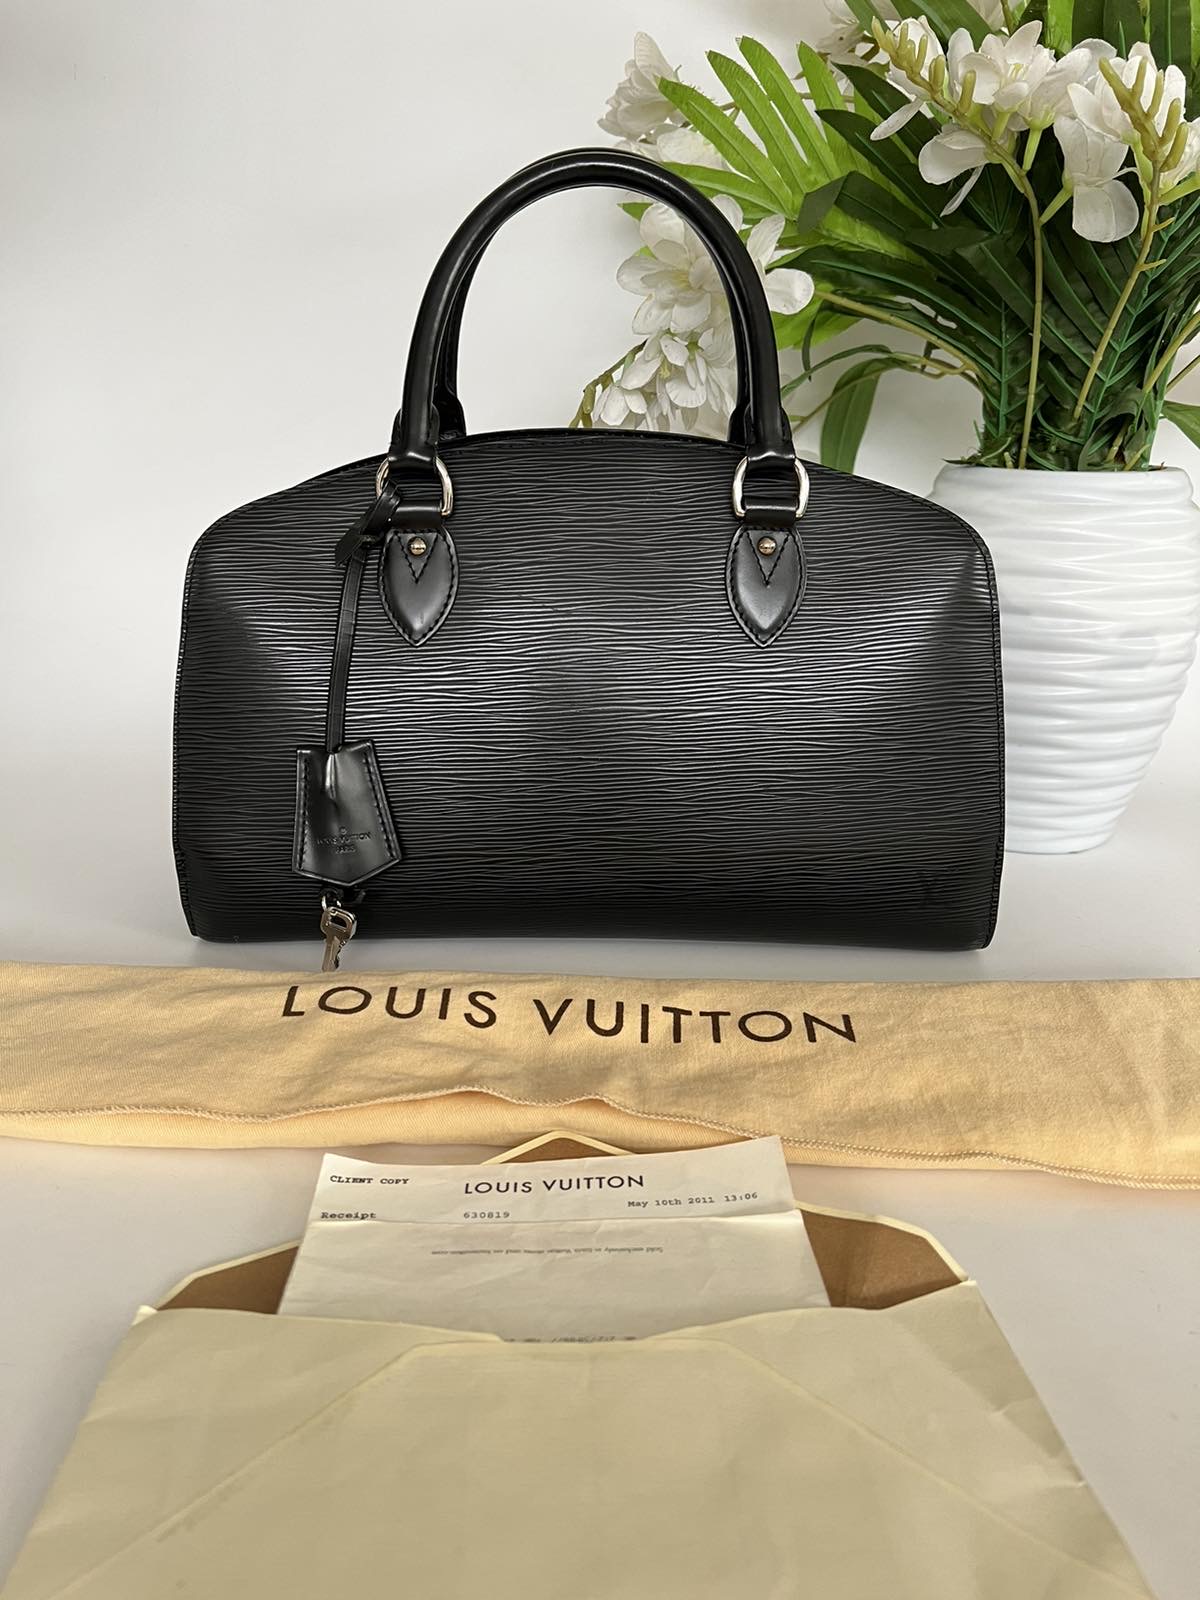 Louis Vuitton Leather Men's Purse in Ikorodu - Bags, Fountain Collections